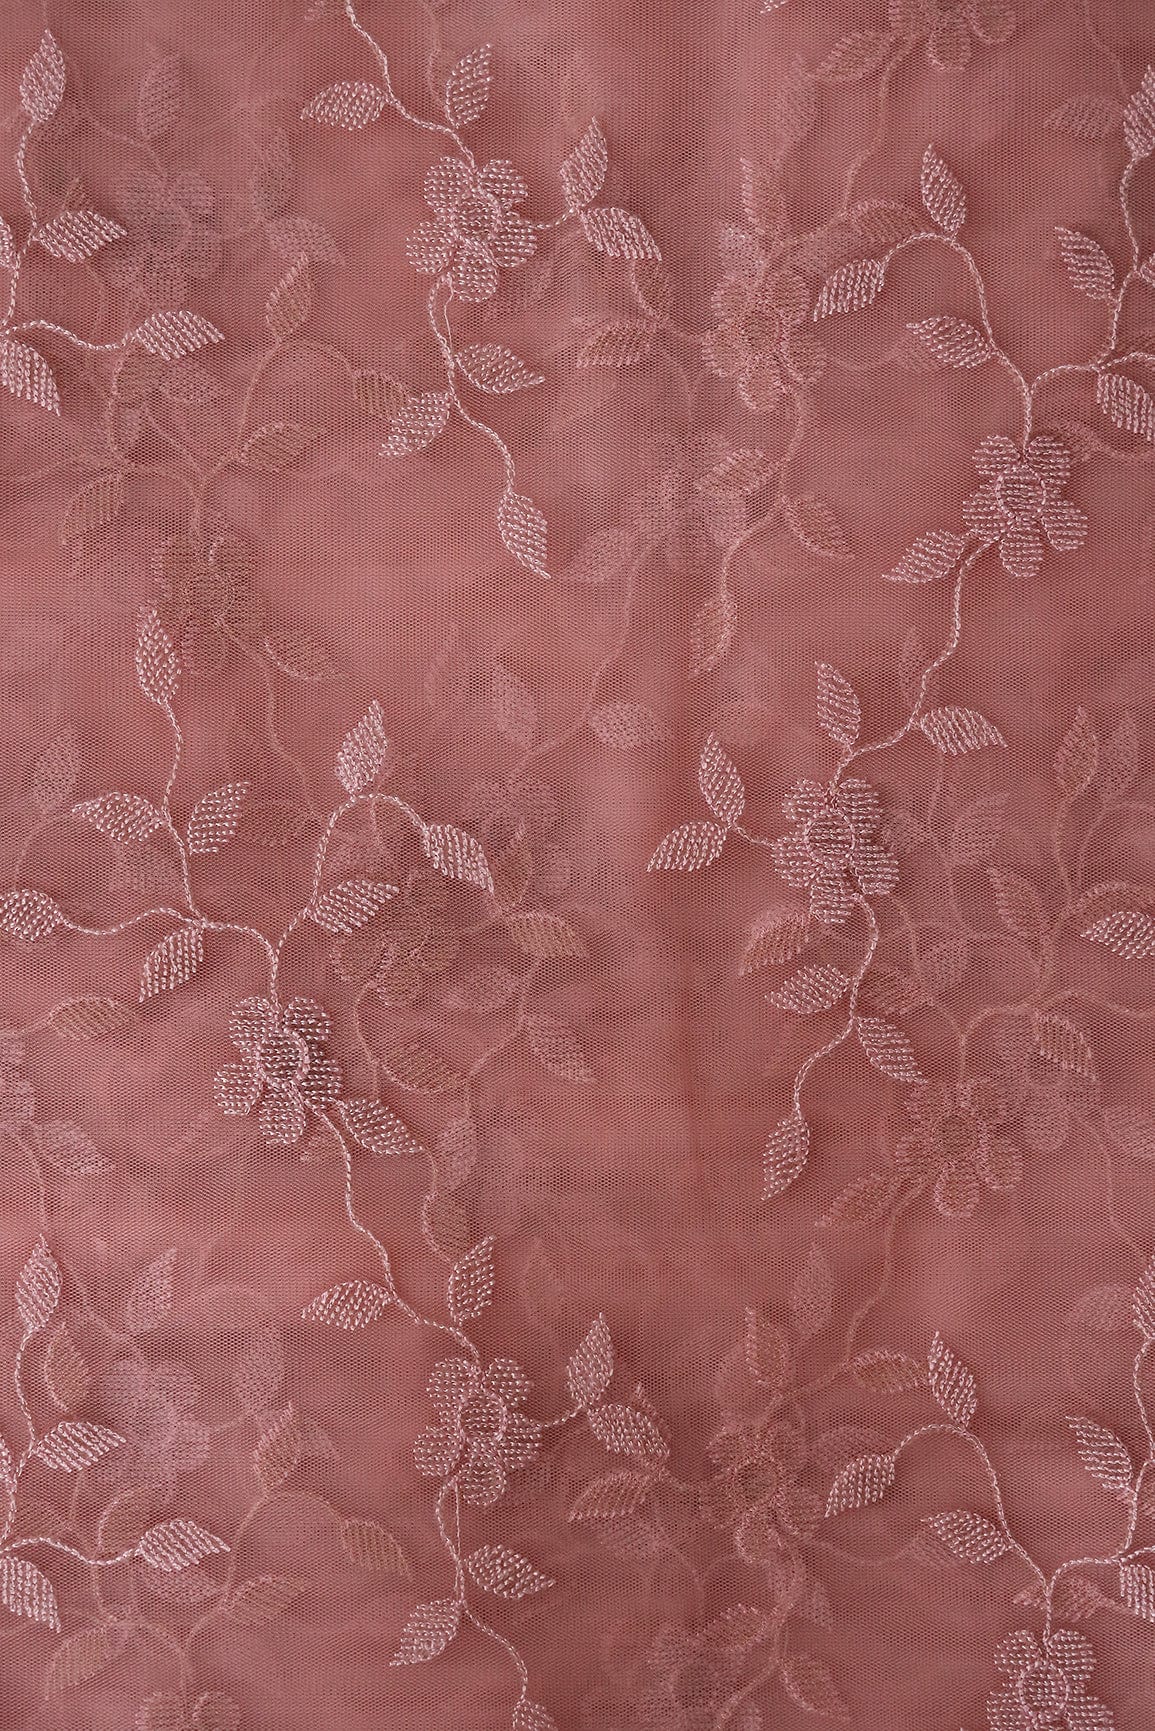 doeraa Embroidery Fabrics 1 Meter Cut Piece Of Light Pink Thread With Silver Sequins Floral Embroidery Work On Light Pink Soft Net Fabric